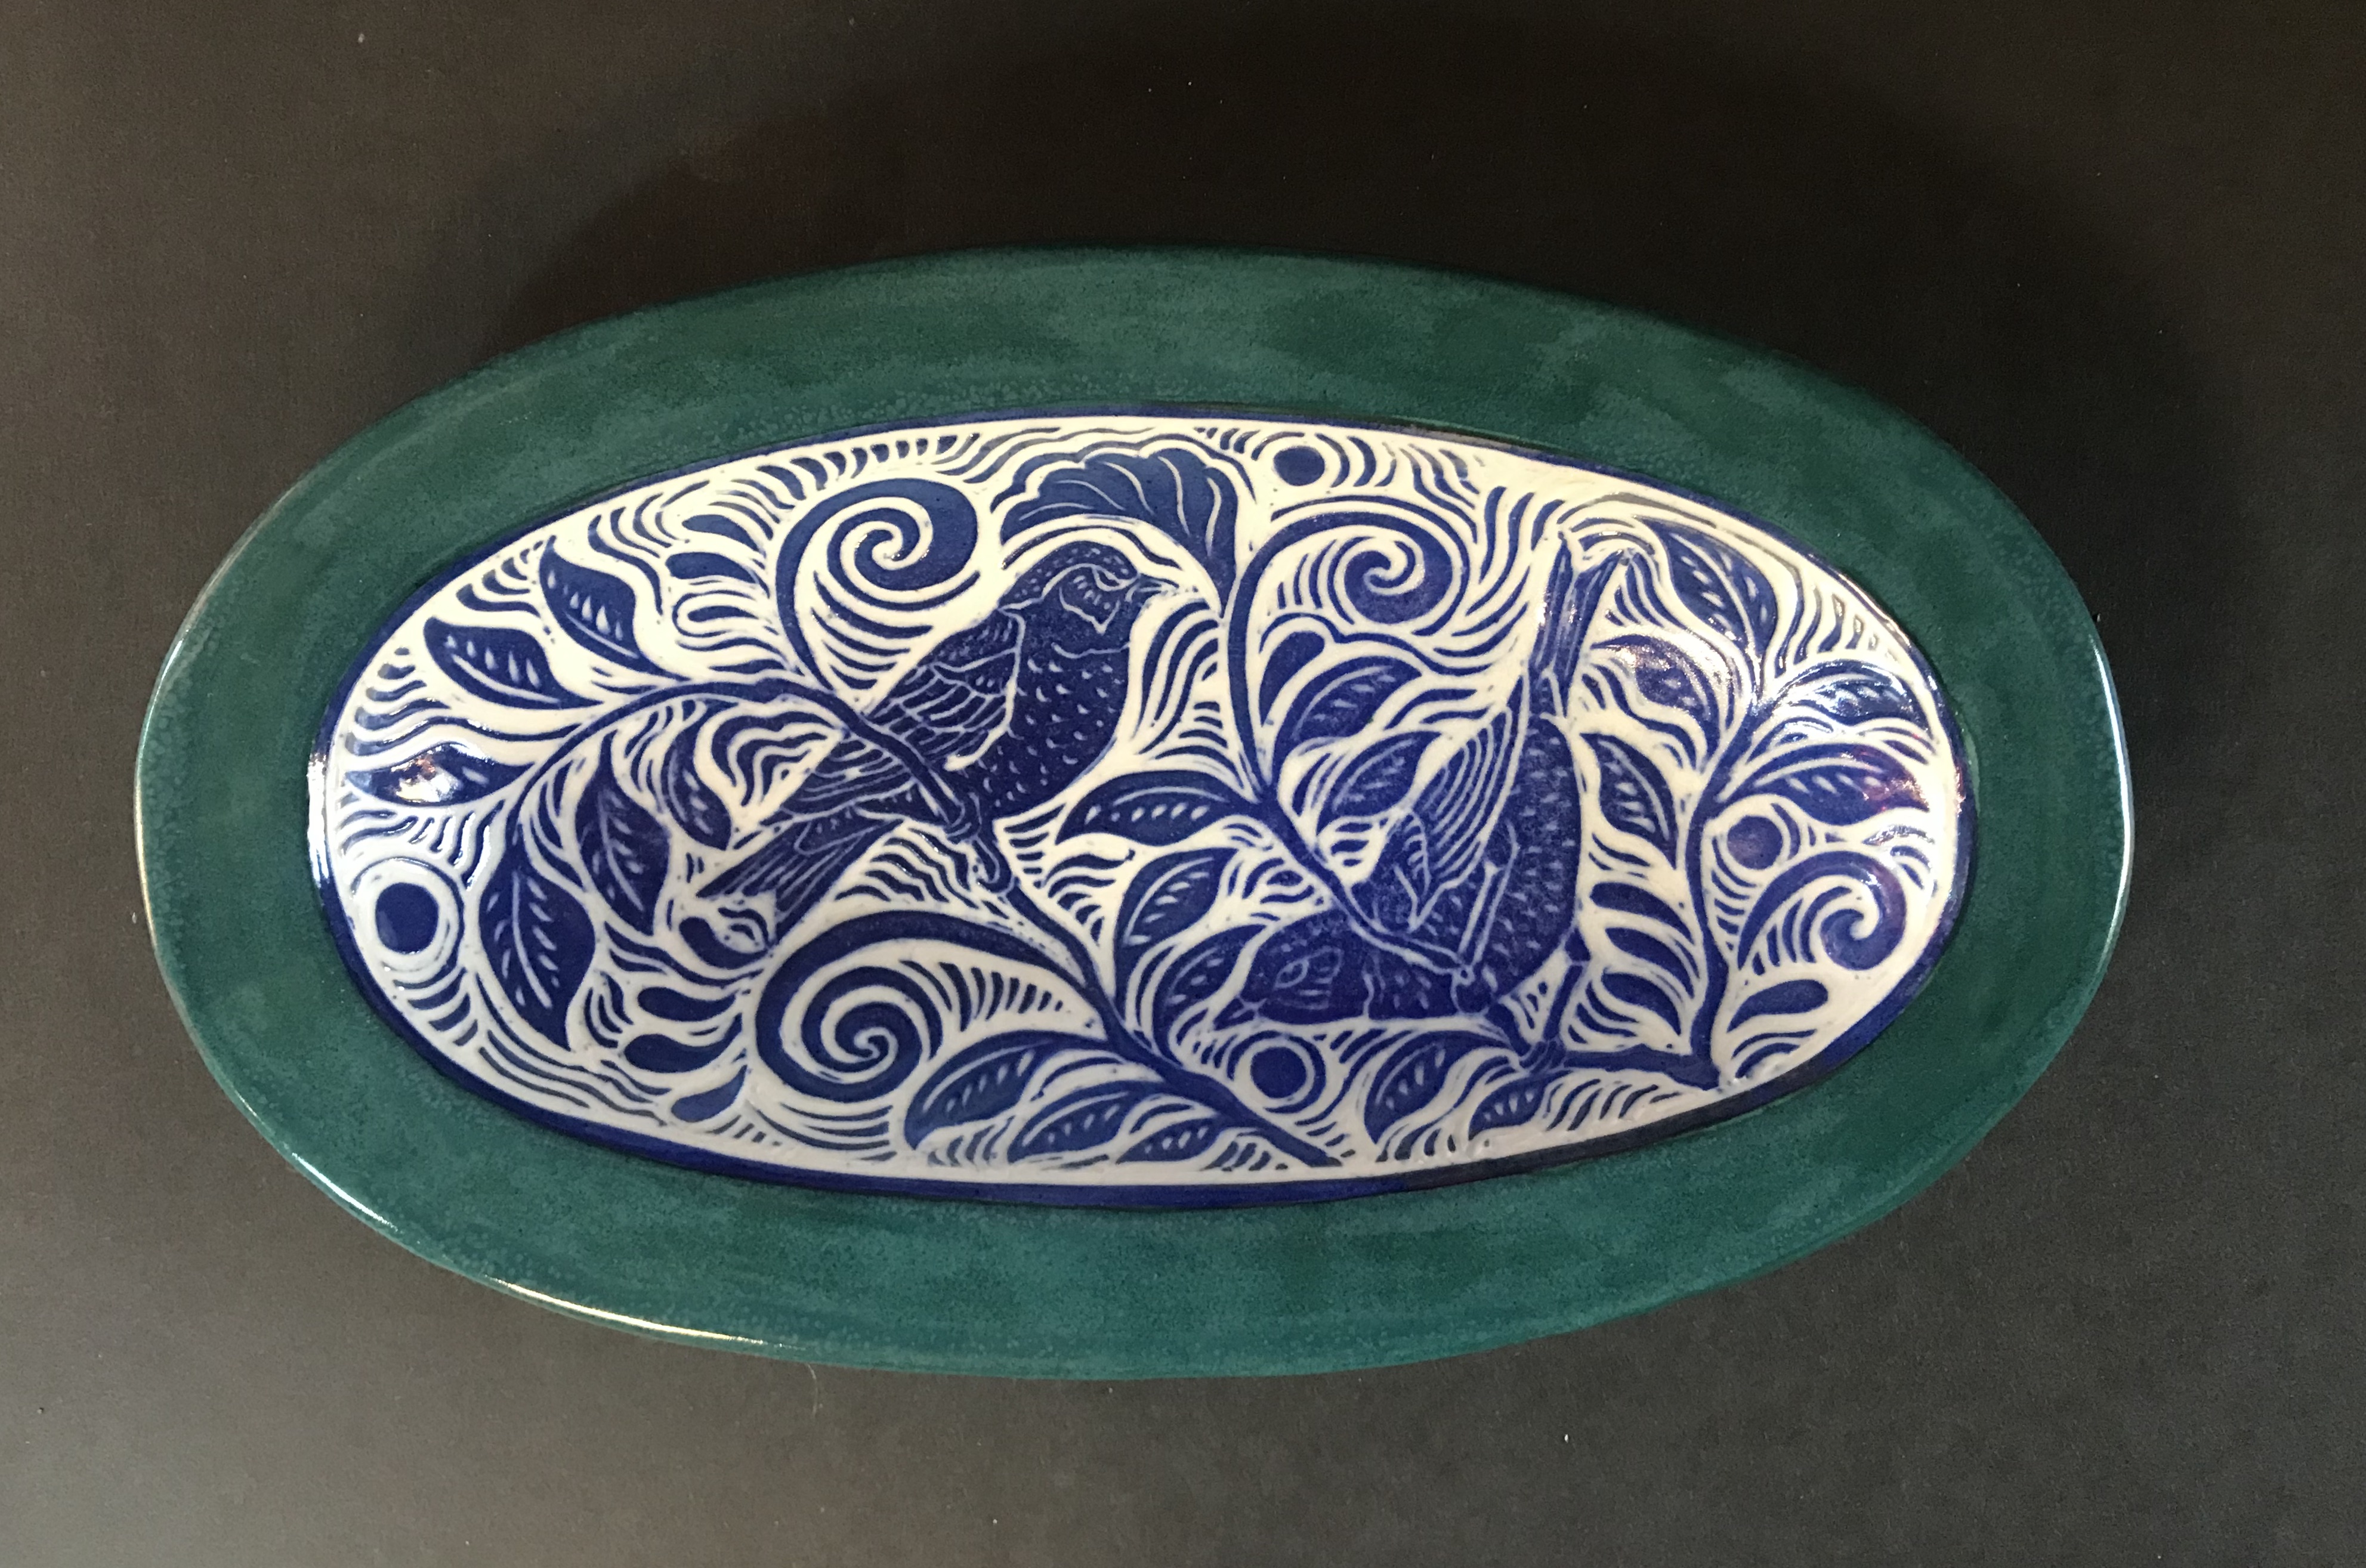 Ceramic Oval Serving Dish in Cobalt Blue, White, and Turquoise with Stylized Warbler Desgin